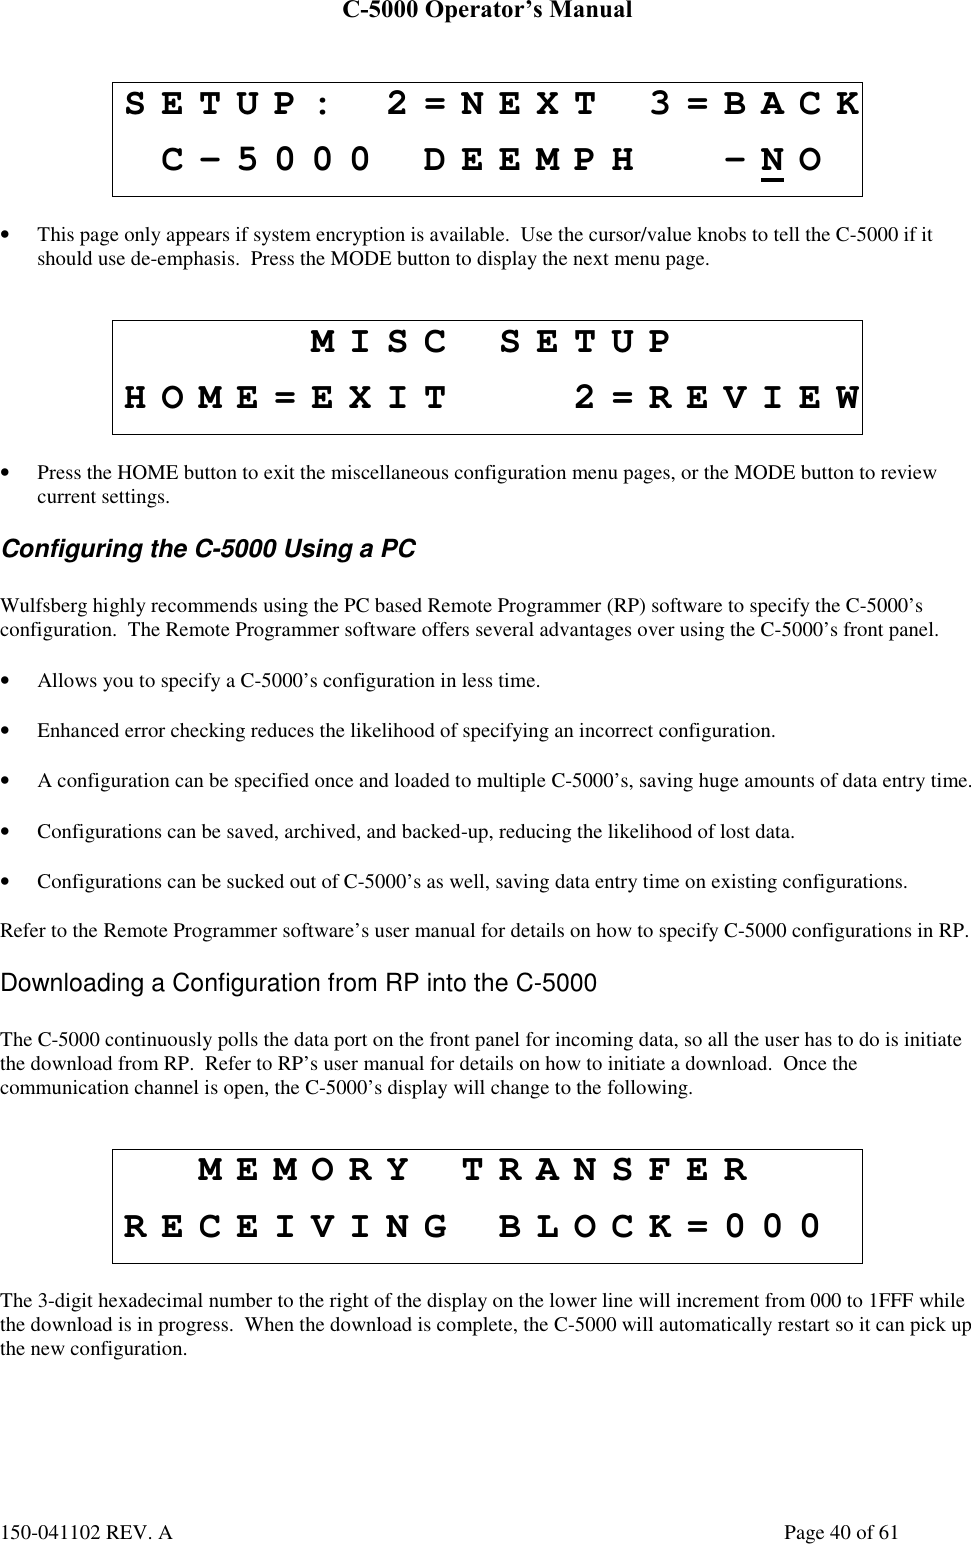 C-5000 Operator’s Manual150-041102 REV. A Page 40 of 61SETUP: 2=NEXT 3=BACKC-5000 DEEMPH -NO• This page only appears if system encryption is available.  Use the cursor/value knobs to tell the C-5000 if itshould use de-emphasis.  Press the MODE button to display the next menu page.MISC SETUPHOME=EXIT 2=REVIEW• Press the HOME button to exit the miscellaneous configuration menu pages, or the MODE button to reviewcurrent settings.Configuring the C-5000 Using a PCWulfsberg highly recommends using the PC based Remote Programmer (RP) software to specify the C-5000’sconfiguration.  The Remote Programmer software offers several advantages over using the C-5000’s front panel.• Allows you to specify a C-5000’s configuration in less time.• Enhanced error checking reduces the likelihood of specifying an incorrect configuration.• A configuration can be specified once and loaded to multiple C-5000’s, saving huge amounts of data entry time.• Configurations can be saved, archived, and backed-up, reducing the likelihood of lost data.• Configurations can be sucked out of C-5000’s as well, saving data entry time on existing configurations.Refer to the Remote Programmer software’s user manual for details on how to specify C-5000 configurations in RP.Downloading a Configuration from RP into the C-5000The C-5000 continuously polls the data port on the front panel for incoming data, so all the user has to do is initiatethe download from RP.  Refer to RP’s user manual for details on how to initiate a download.  Once thecommunication channel is open, the C-5000’s display will change to the following.MEMORY TRANSFERRECEIVING BLOCK=000The 3-digit hexadecimal number to the right of the display on the lower line will increment from 000 to 1FFF whilethe download is in progress.  When the download is complete, the C-5000 will automatically restart so it can pick upthe new configuration.